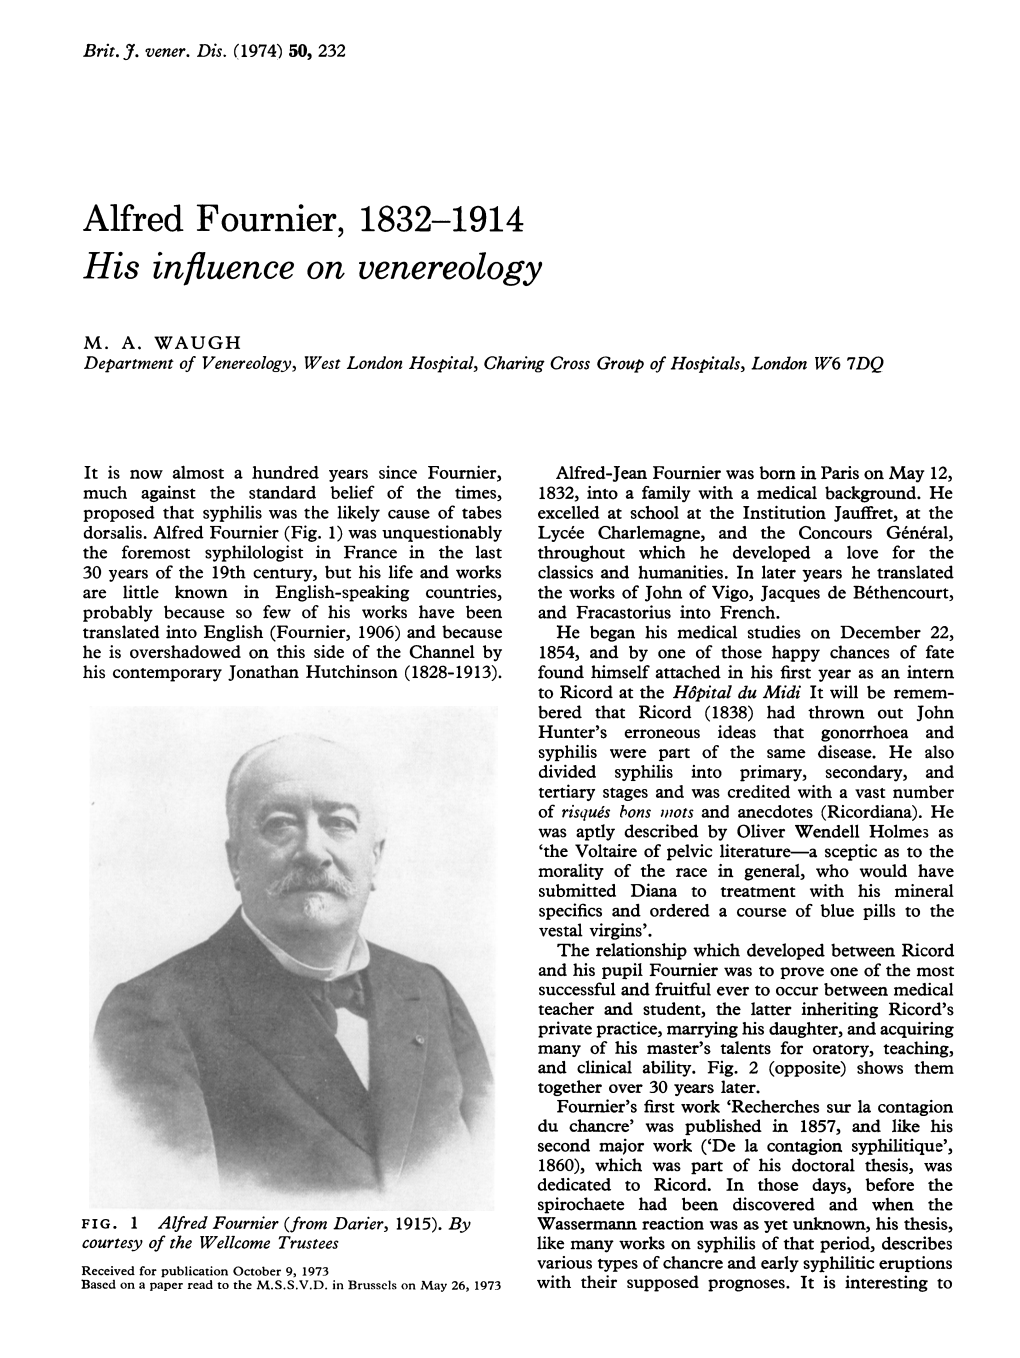 Alfred Fournier, 1832-1914 His Influence on Venereology